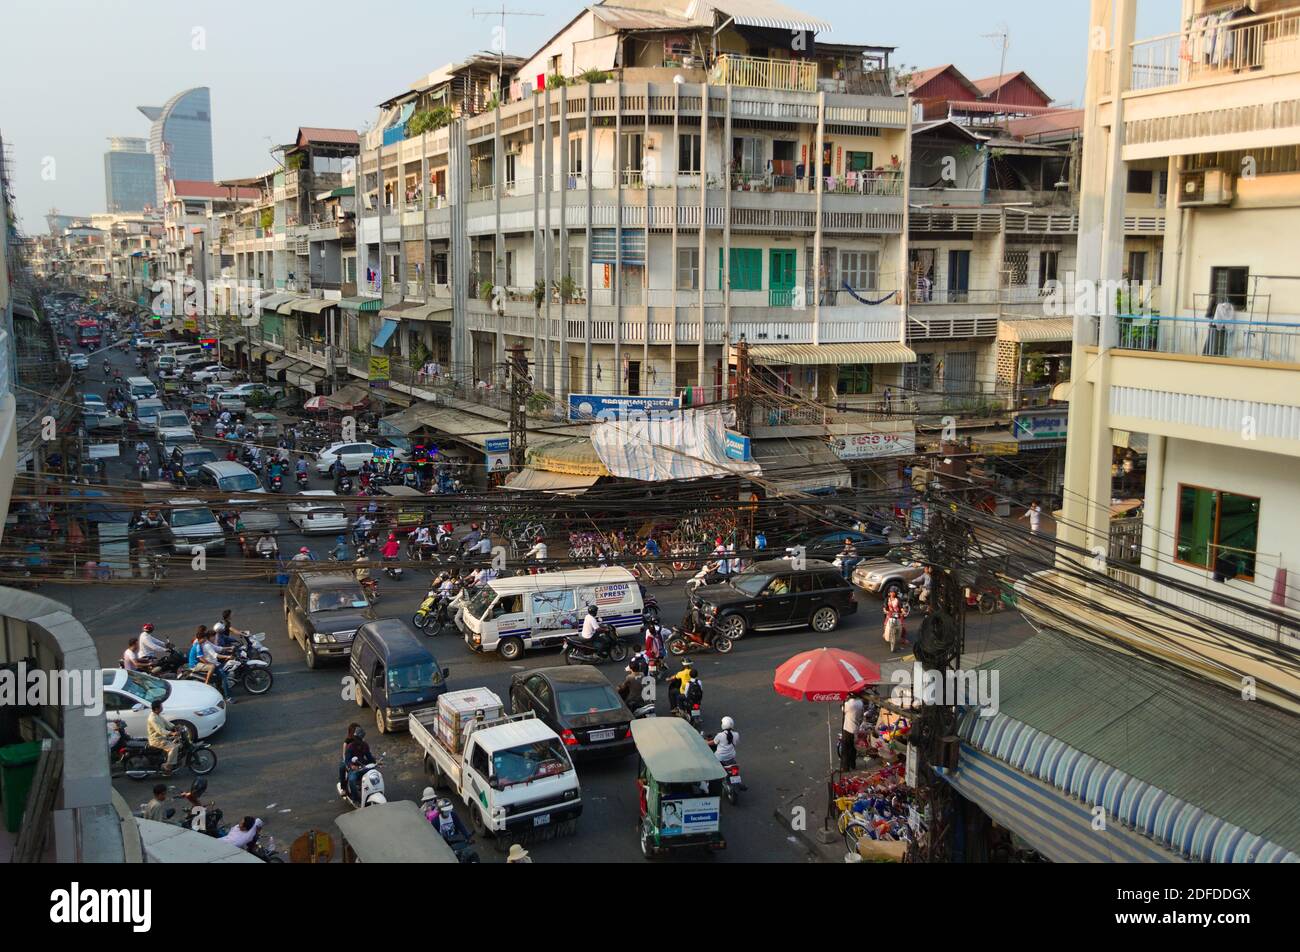 Phnom Penh, Cambodia - March, 2015: Traffic jam on a road intersection. Stuck in a traffic with crowd of motorbikes and car on the crossroad. Stock Photo